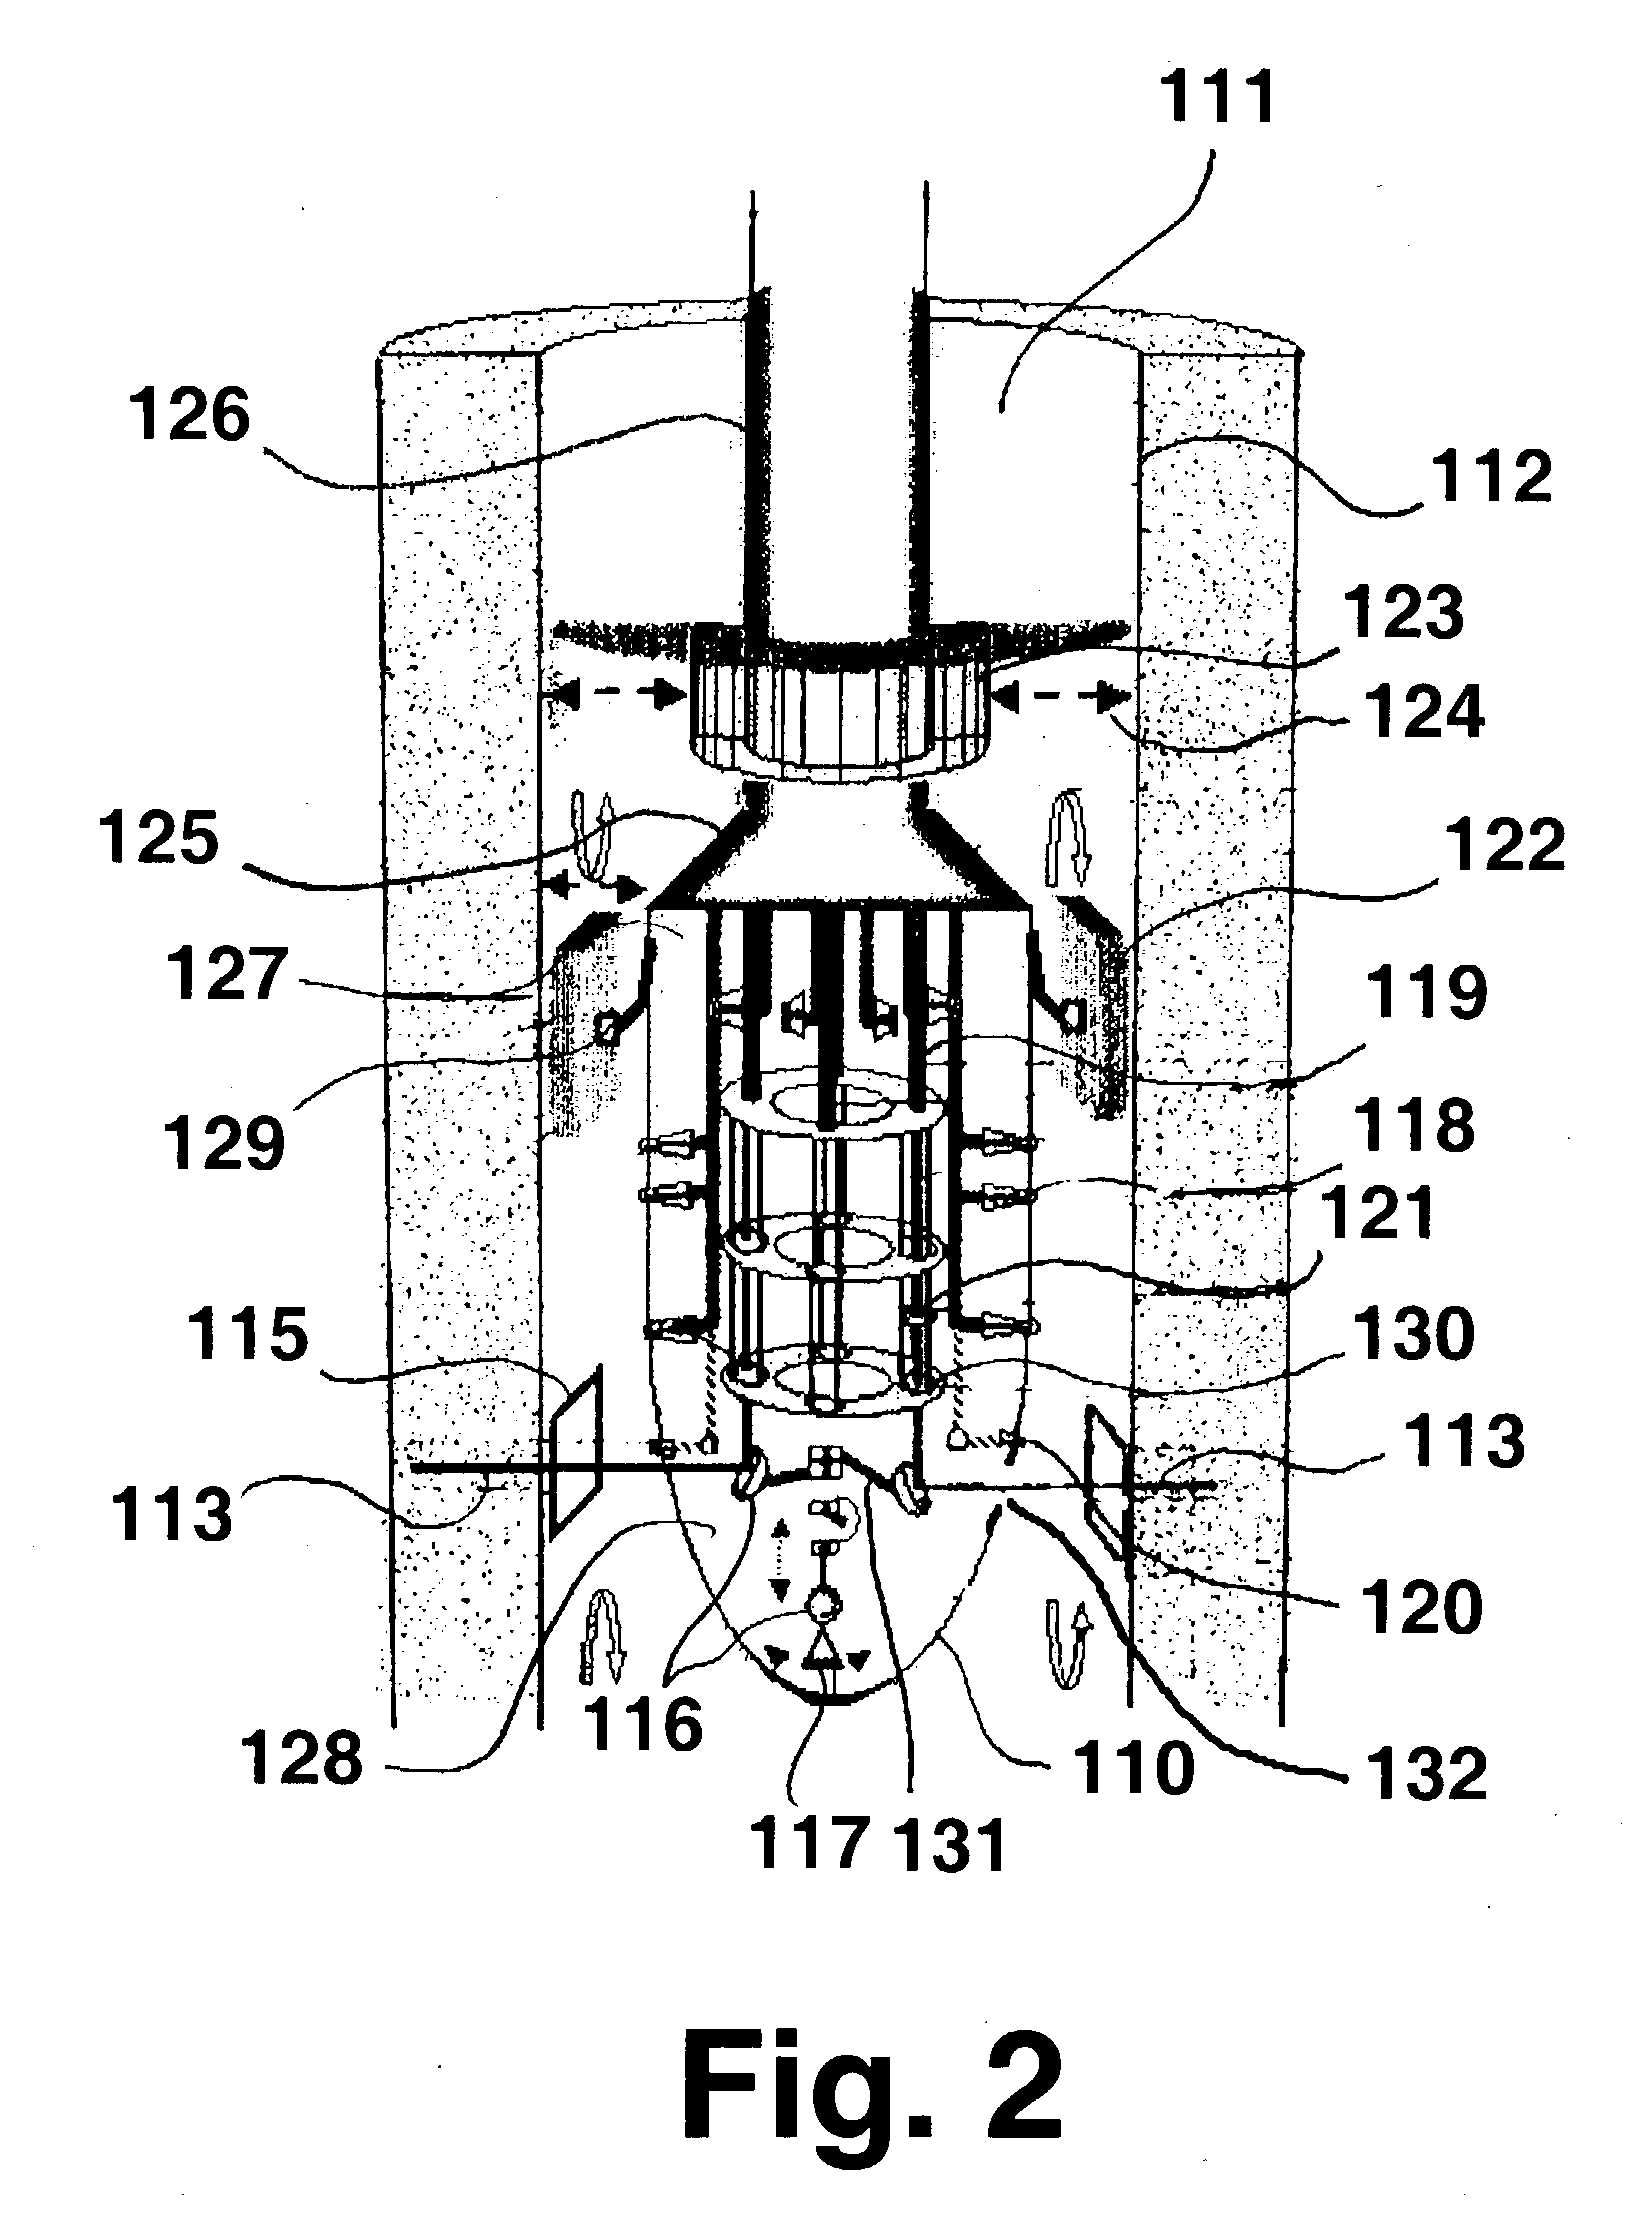 Laser wellbore completion apparatus and method